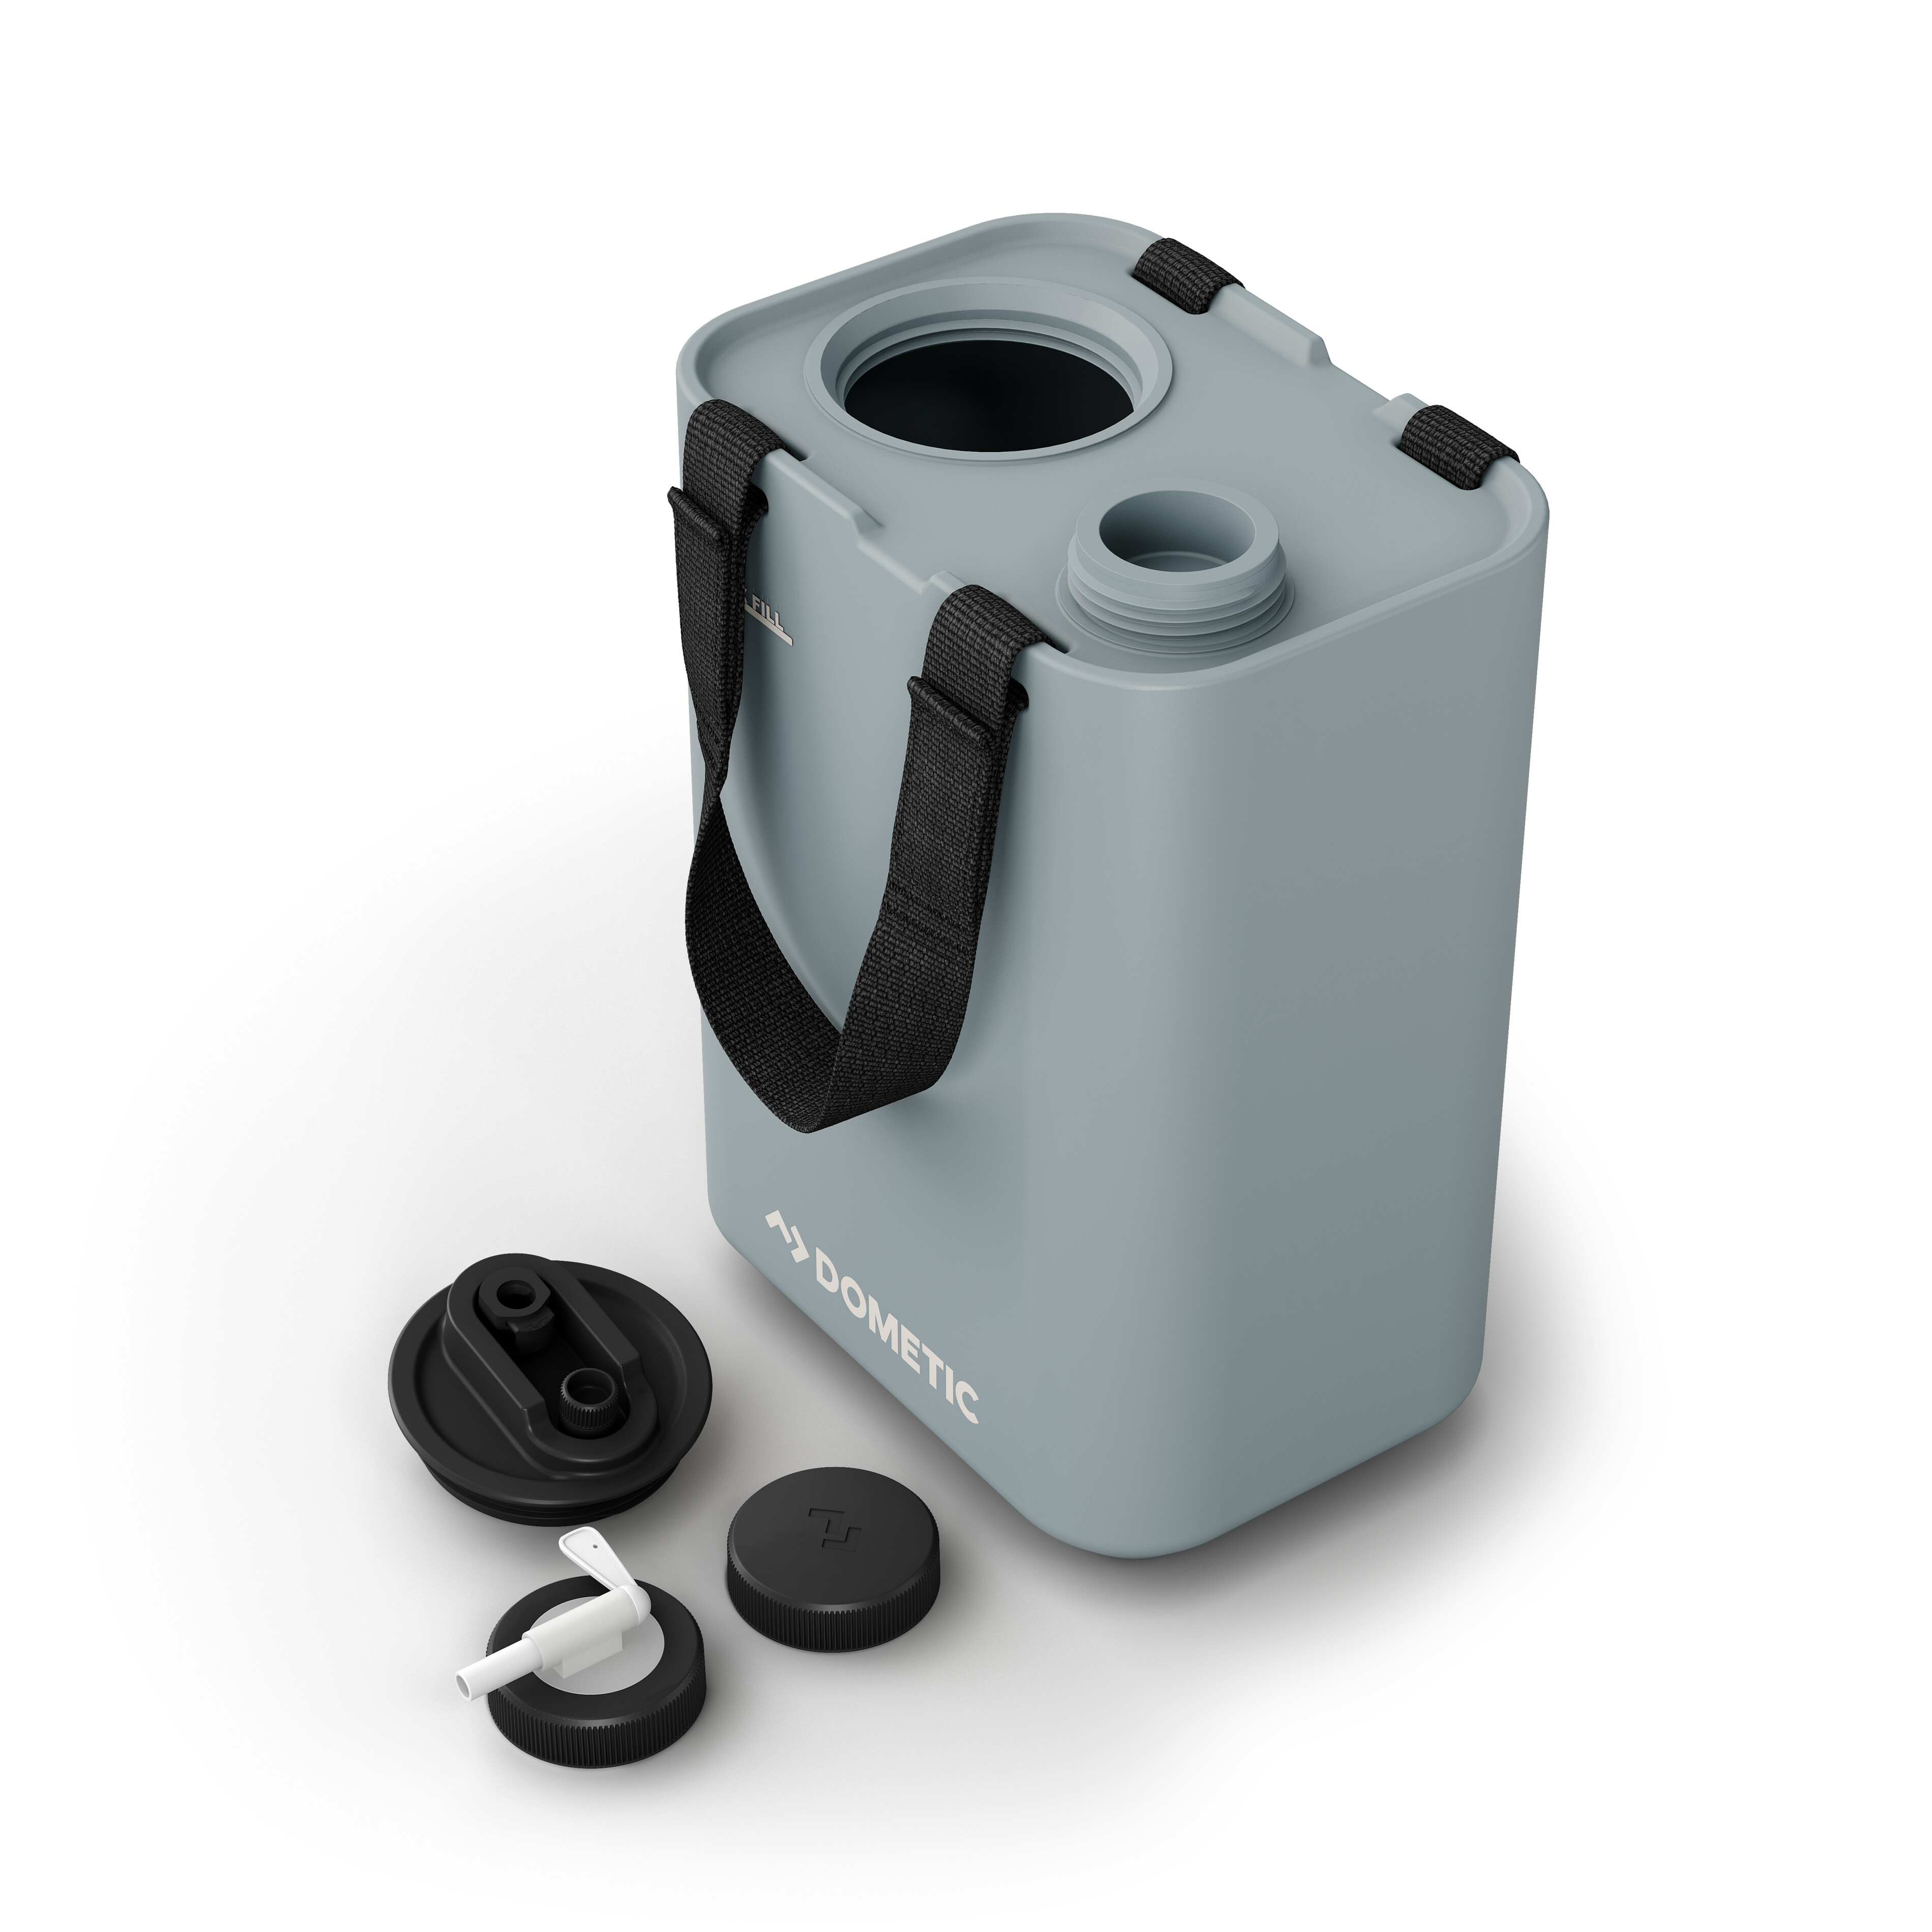 Dometic wins ISPO AWARD 2023 for Hydration Water Faucet & Water Jug